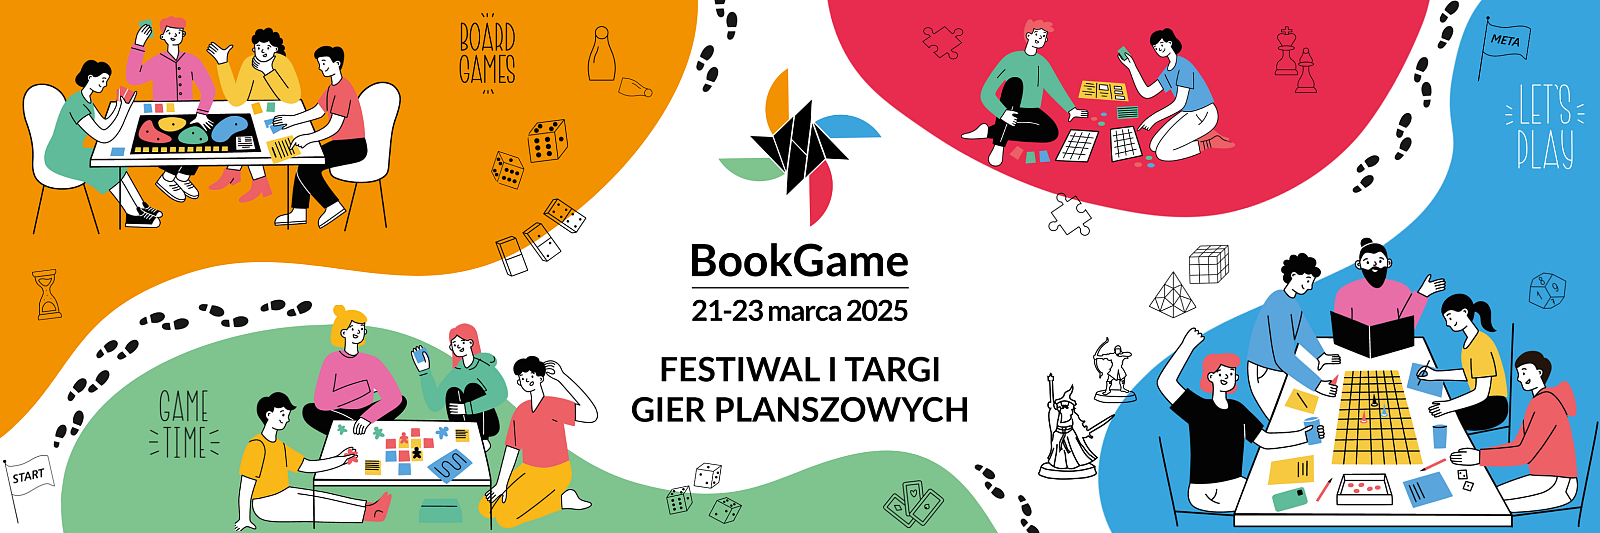 BookGame2025 - IG tryptyk (3240 x 1080 px).png [1.05 MB]